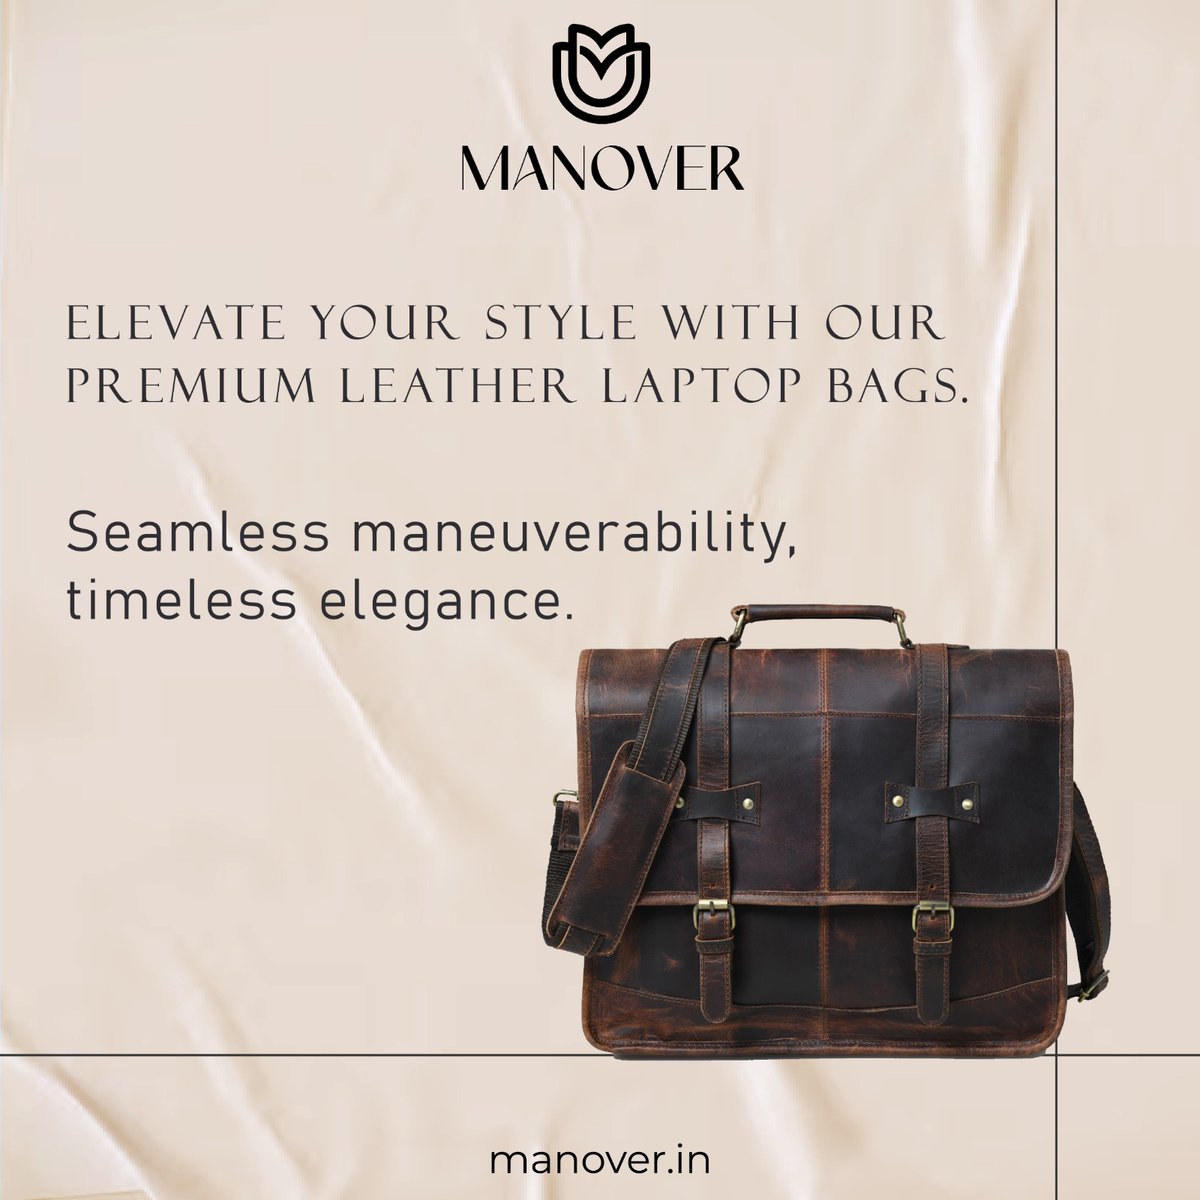 Elevate your style with our premium leather laptop bags. Experience seamless maneuverability and timeless elegance. Make a statement wherever you go. 

#ManoverExportPvtLtd #ManoverStyle #laptopbag #leatherbags #leatherlaptopbag  #FashionWithPurpose #talwara #rajasthan